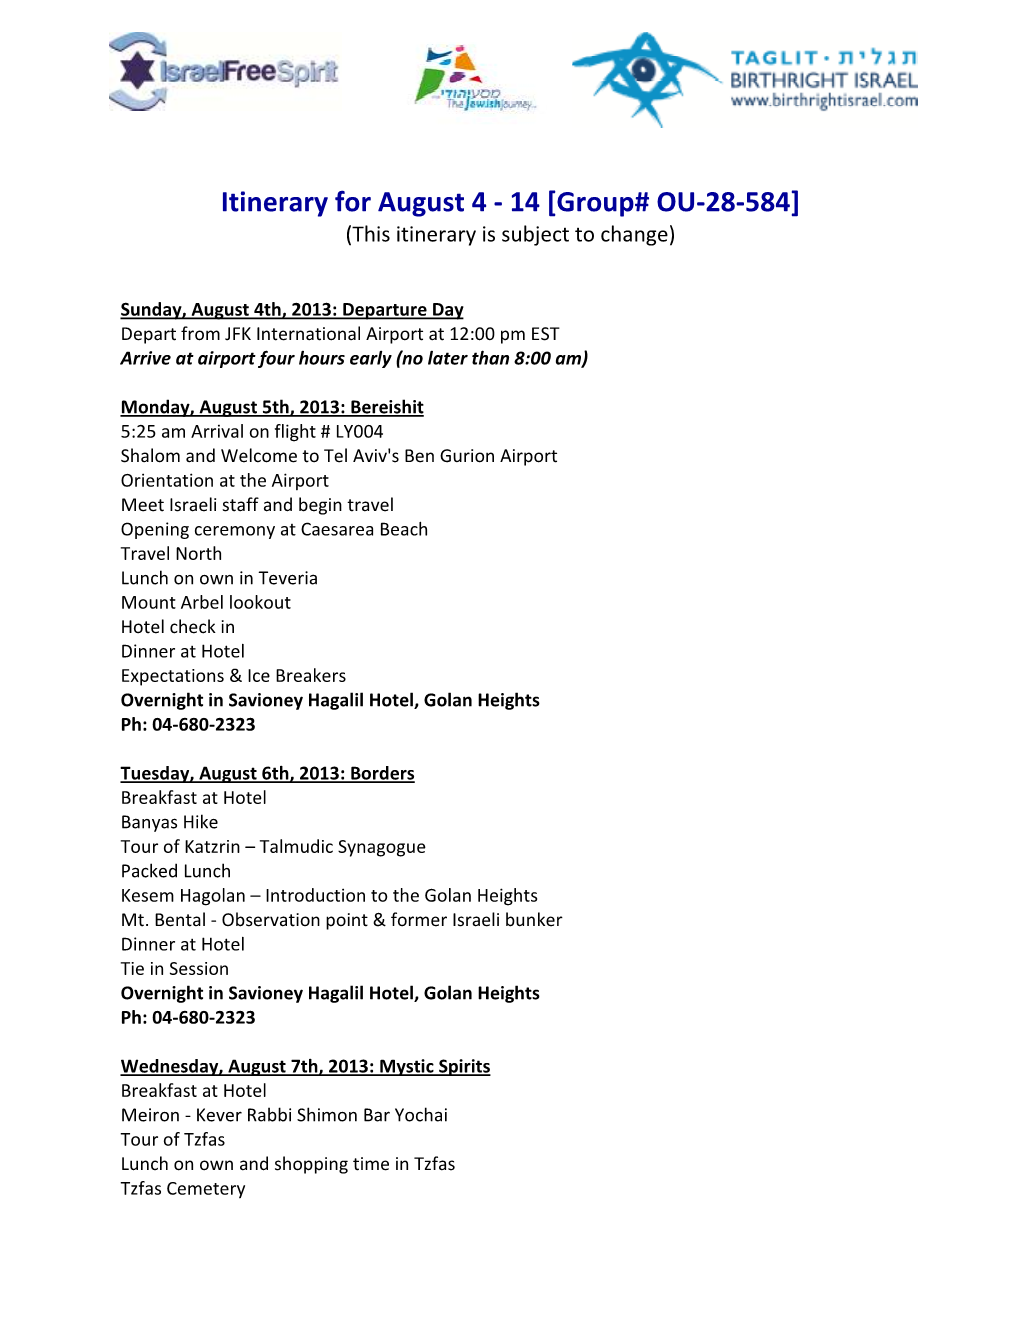 Itinerary for August 4 - 14 [Group# OU-28-584] (This Itinerary Is Subject to Change)